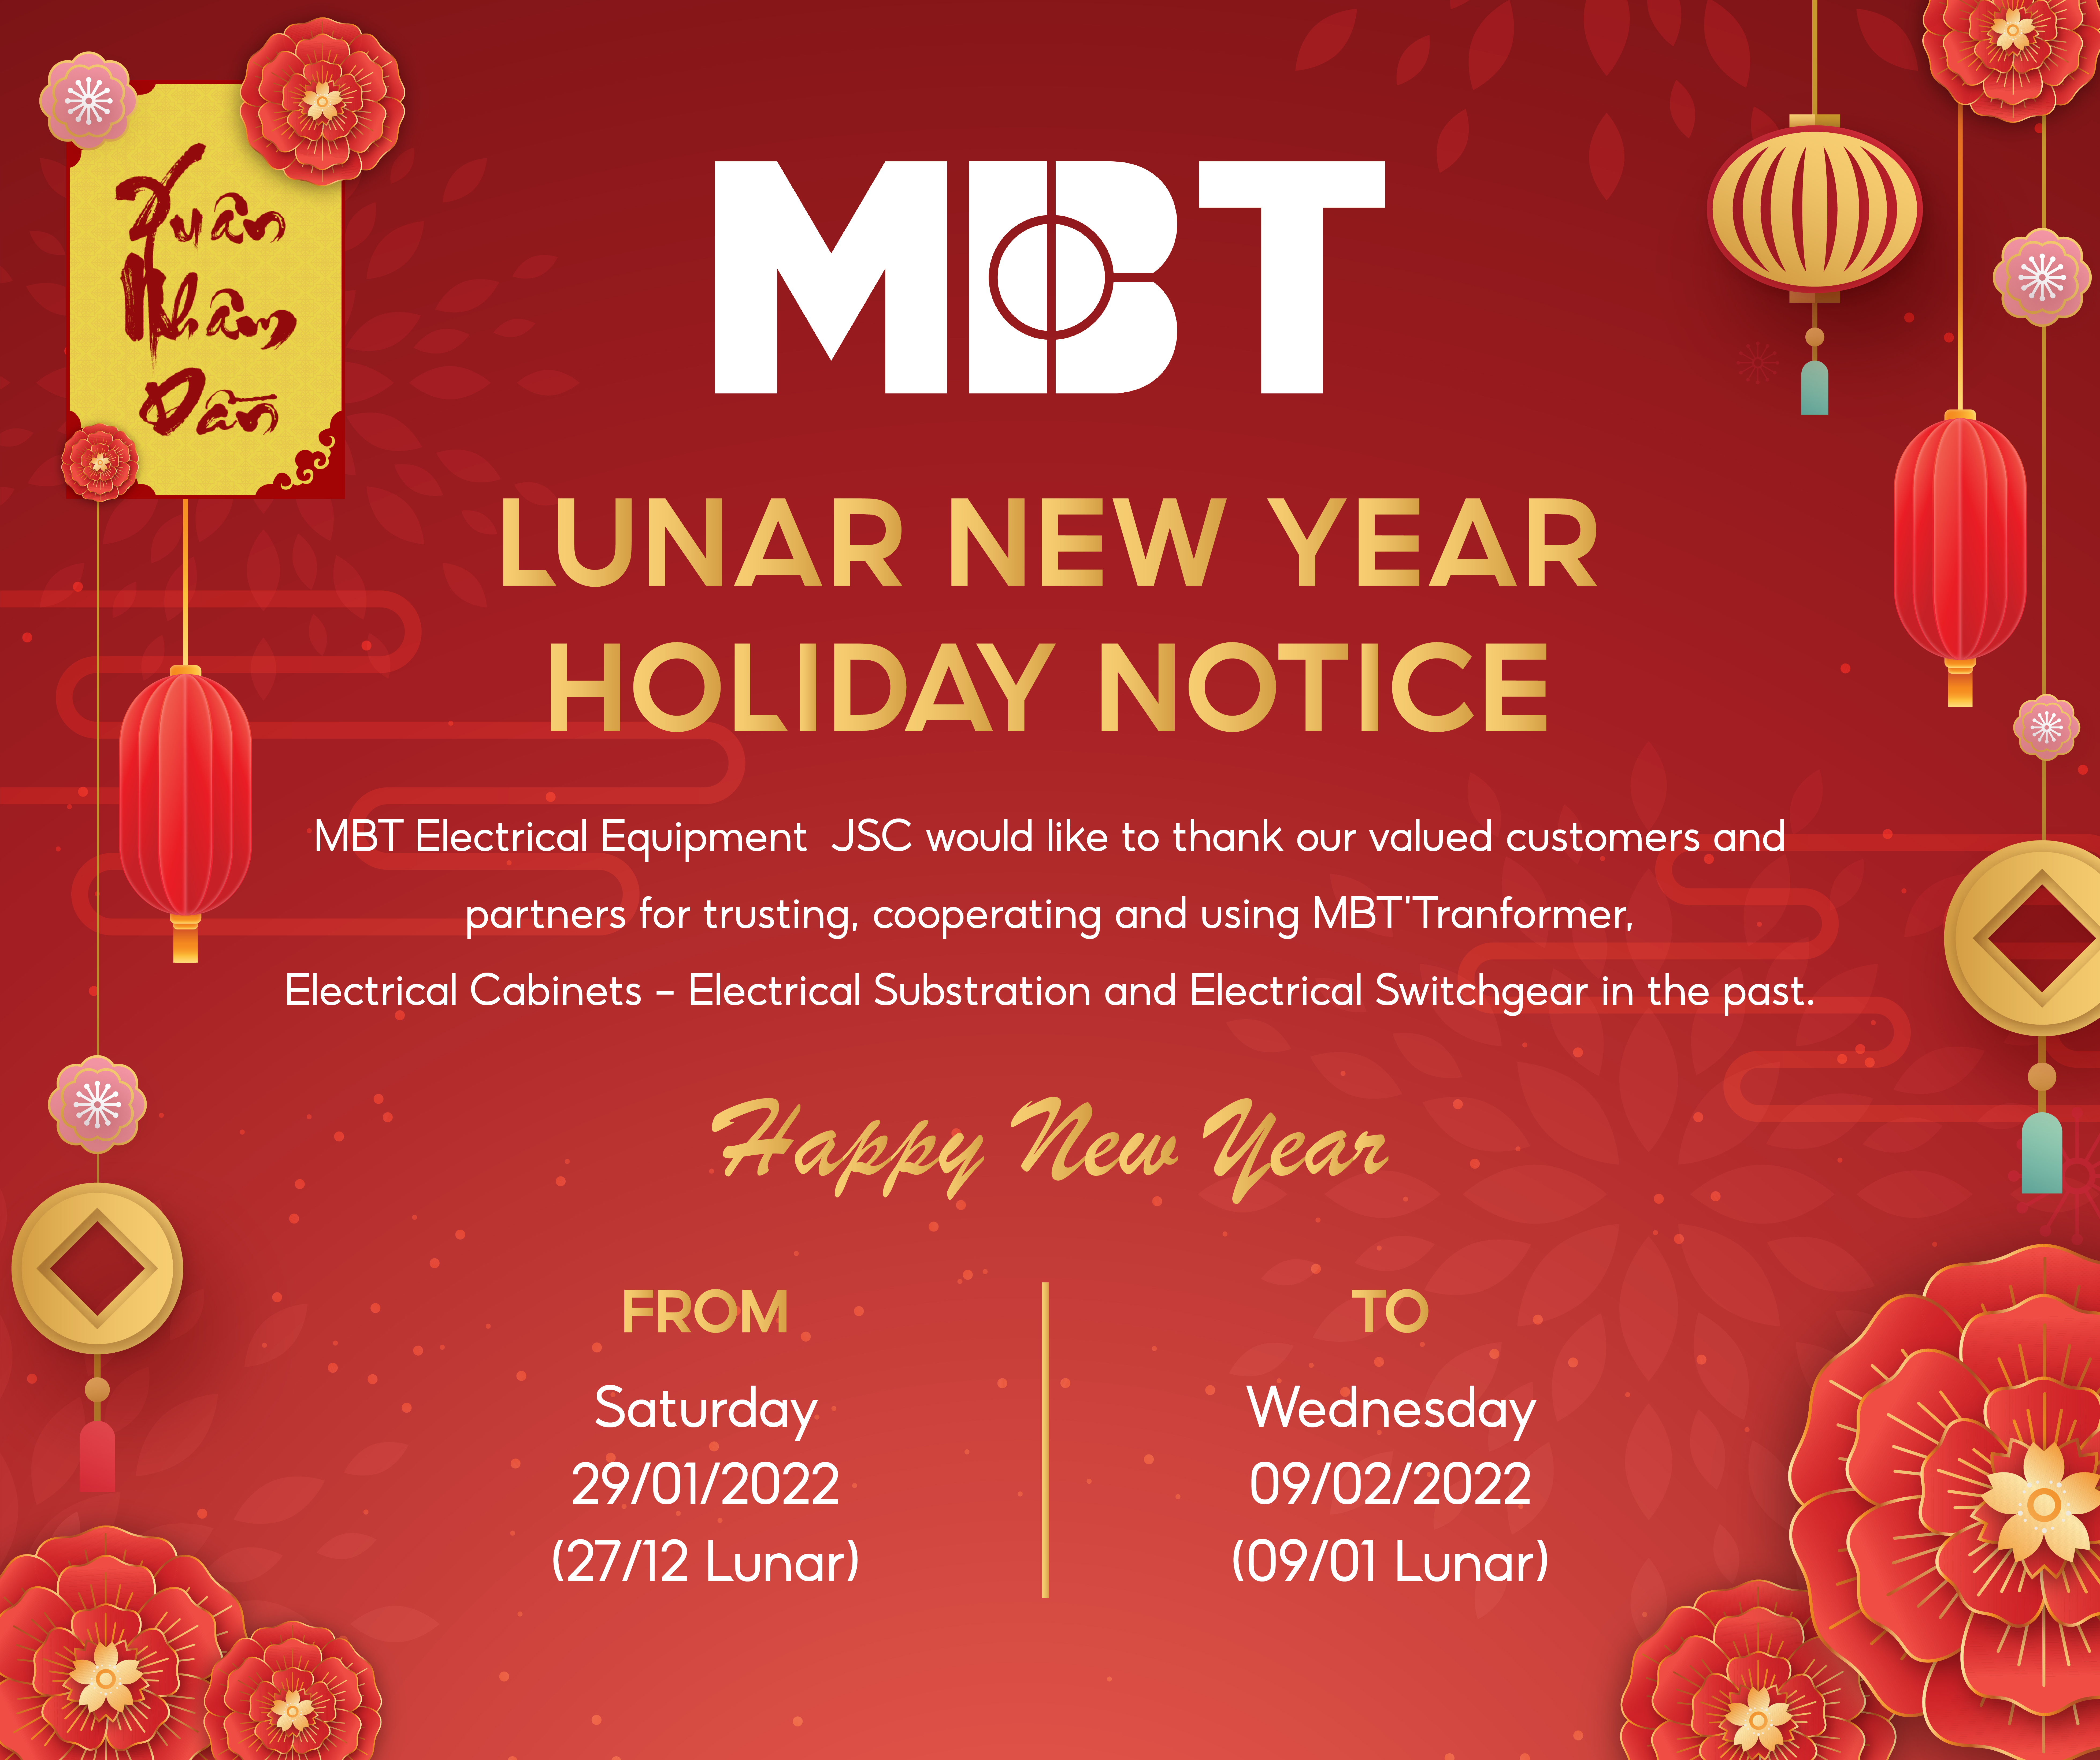 LUNAR NEW YEAR HOLIDAY NOTICE 2022